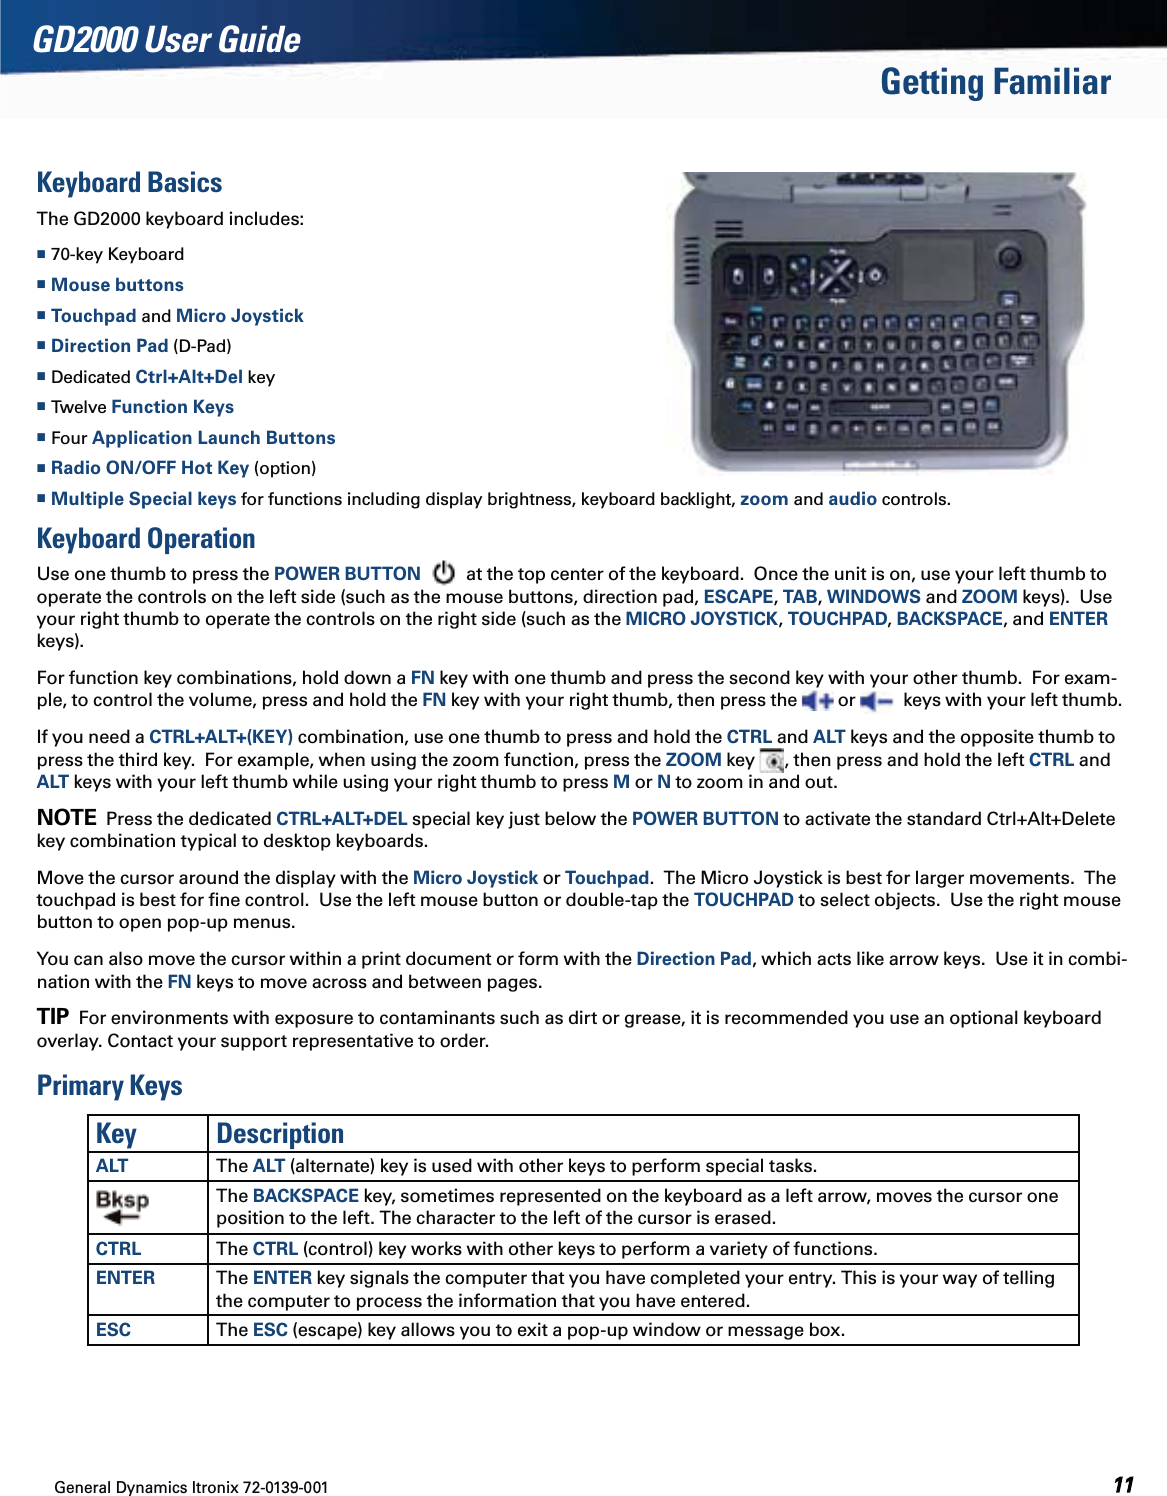 General Dynamics Itronix 72-0139-001  GD2000 User GuideGetting FamiliarKeyboard BasicsThe GD2000 keyboard includes: 70-key Keyboard Mouse buttons Touchpad and Micro Joystick Direction Pad (D-Pad) Dedicated Ctrl+Alt+Del key Twelve Function Keys Four Application Launch Buttons  Radio ON/OFF Hot Key (option) Multiple Special keys for functions including display brightness, keyboard backlight, zoom and audio controls.Keyboard OperationUse one thumb to press the POWER BUTTON  at the top center of the keyboard.  Once the unit is on, use your left thumb to operate the controls on the left side (such as the mouse buttons, direction pad, ESCAPE, TAB, WINDOWS and ZOOM keys).  Use your right thumb to operate the controls on the right side (such as the MICRO JOYSTICK, TOUCHPAD, BACKSPACE, and ENTER keys). For function key combinations, hold down a FN key with one thumb and press the second key with your other thumb.  For exam-ple, to control the volume, press and hold the FN key with your right thumb, then press the   or    keys with your left thumb.If you need a CTRL+ALT+(KEY) combination, use one thumb to press and hold the CTRL and ALT keys and the opposite thumb to press the third key.  For example, when using the zoom function, press the ZOOM key  , then press and hold the left CTRL and ALT keys with your left thumb while using your right thumb to press M or N to zoom in and out.  NOTE  Press the dedicated CTRL+ALT+DEL special key just below the POWER BUTTON to activate the standard Ctrl+Alt+Delete key combination typical to desktop keyboards.Move the cursor around the display with the Micro Joystick or Touchpad.  The Micro Joystick is best for larger movements.  The touchpad is best for ﬁne control.  Use the left mouse button or double-tap the TOUCHPAD to select objects.  Use the right mouse button to open pop-up menus.You can also move the cursor within a print document or form with the Direction Pad, which acts like arrow keys.  Use it in combi-nation with the FN keys to move across and between pages.TIP  For environments with exposure to contaminants such as dirt or grease, it is recommended you use an optional keyboard overlay. Contact your support representative to order.Primary KeysKey DescriptionALT The ALT (alternate) key is used with other keys to perform special tasks.The BACKSPACE key, sometimes represented on the keyboard as a left arrow, moves the cursor one position to the left. The character to the left of the cursor is erased.CTRL The CTRL (control) key works with other keys to perform a variety of functions.ENTER The ENTER key signals the computer that you have completed your entry. This is your way of telling the computer to process the information that you have entered.ESC The ESC (escape) key allows you to exit a pop-up window or message box.